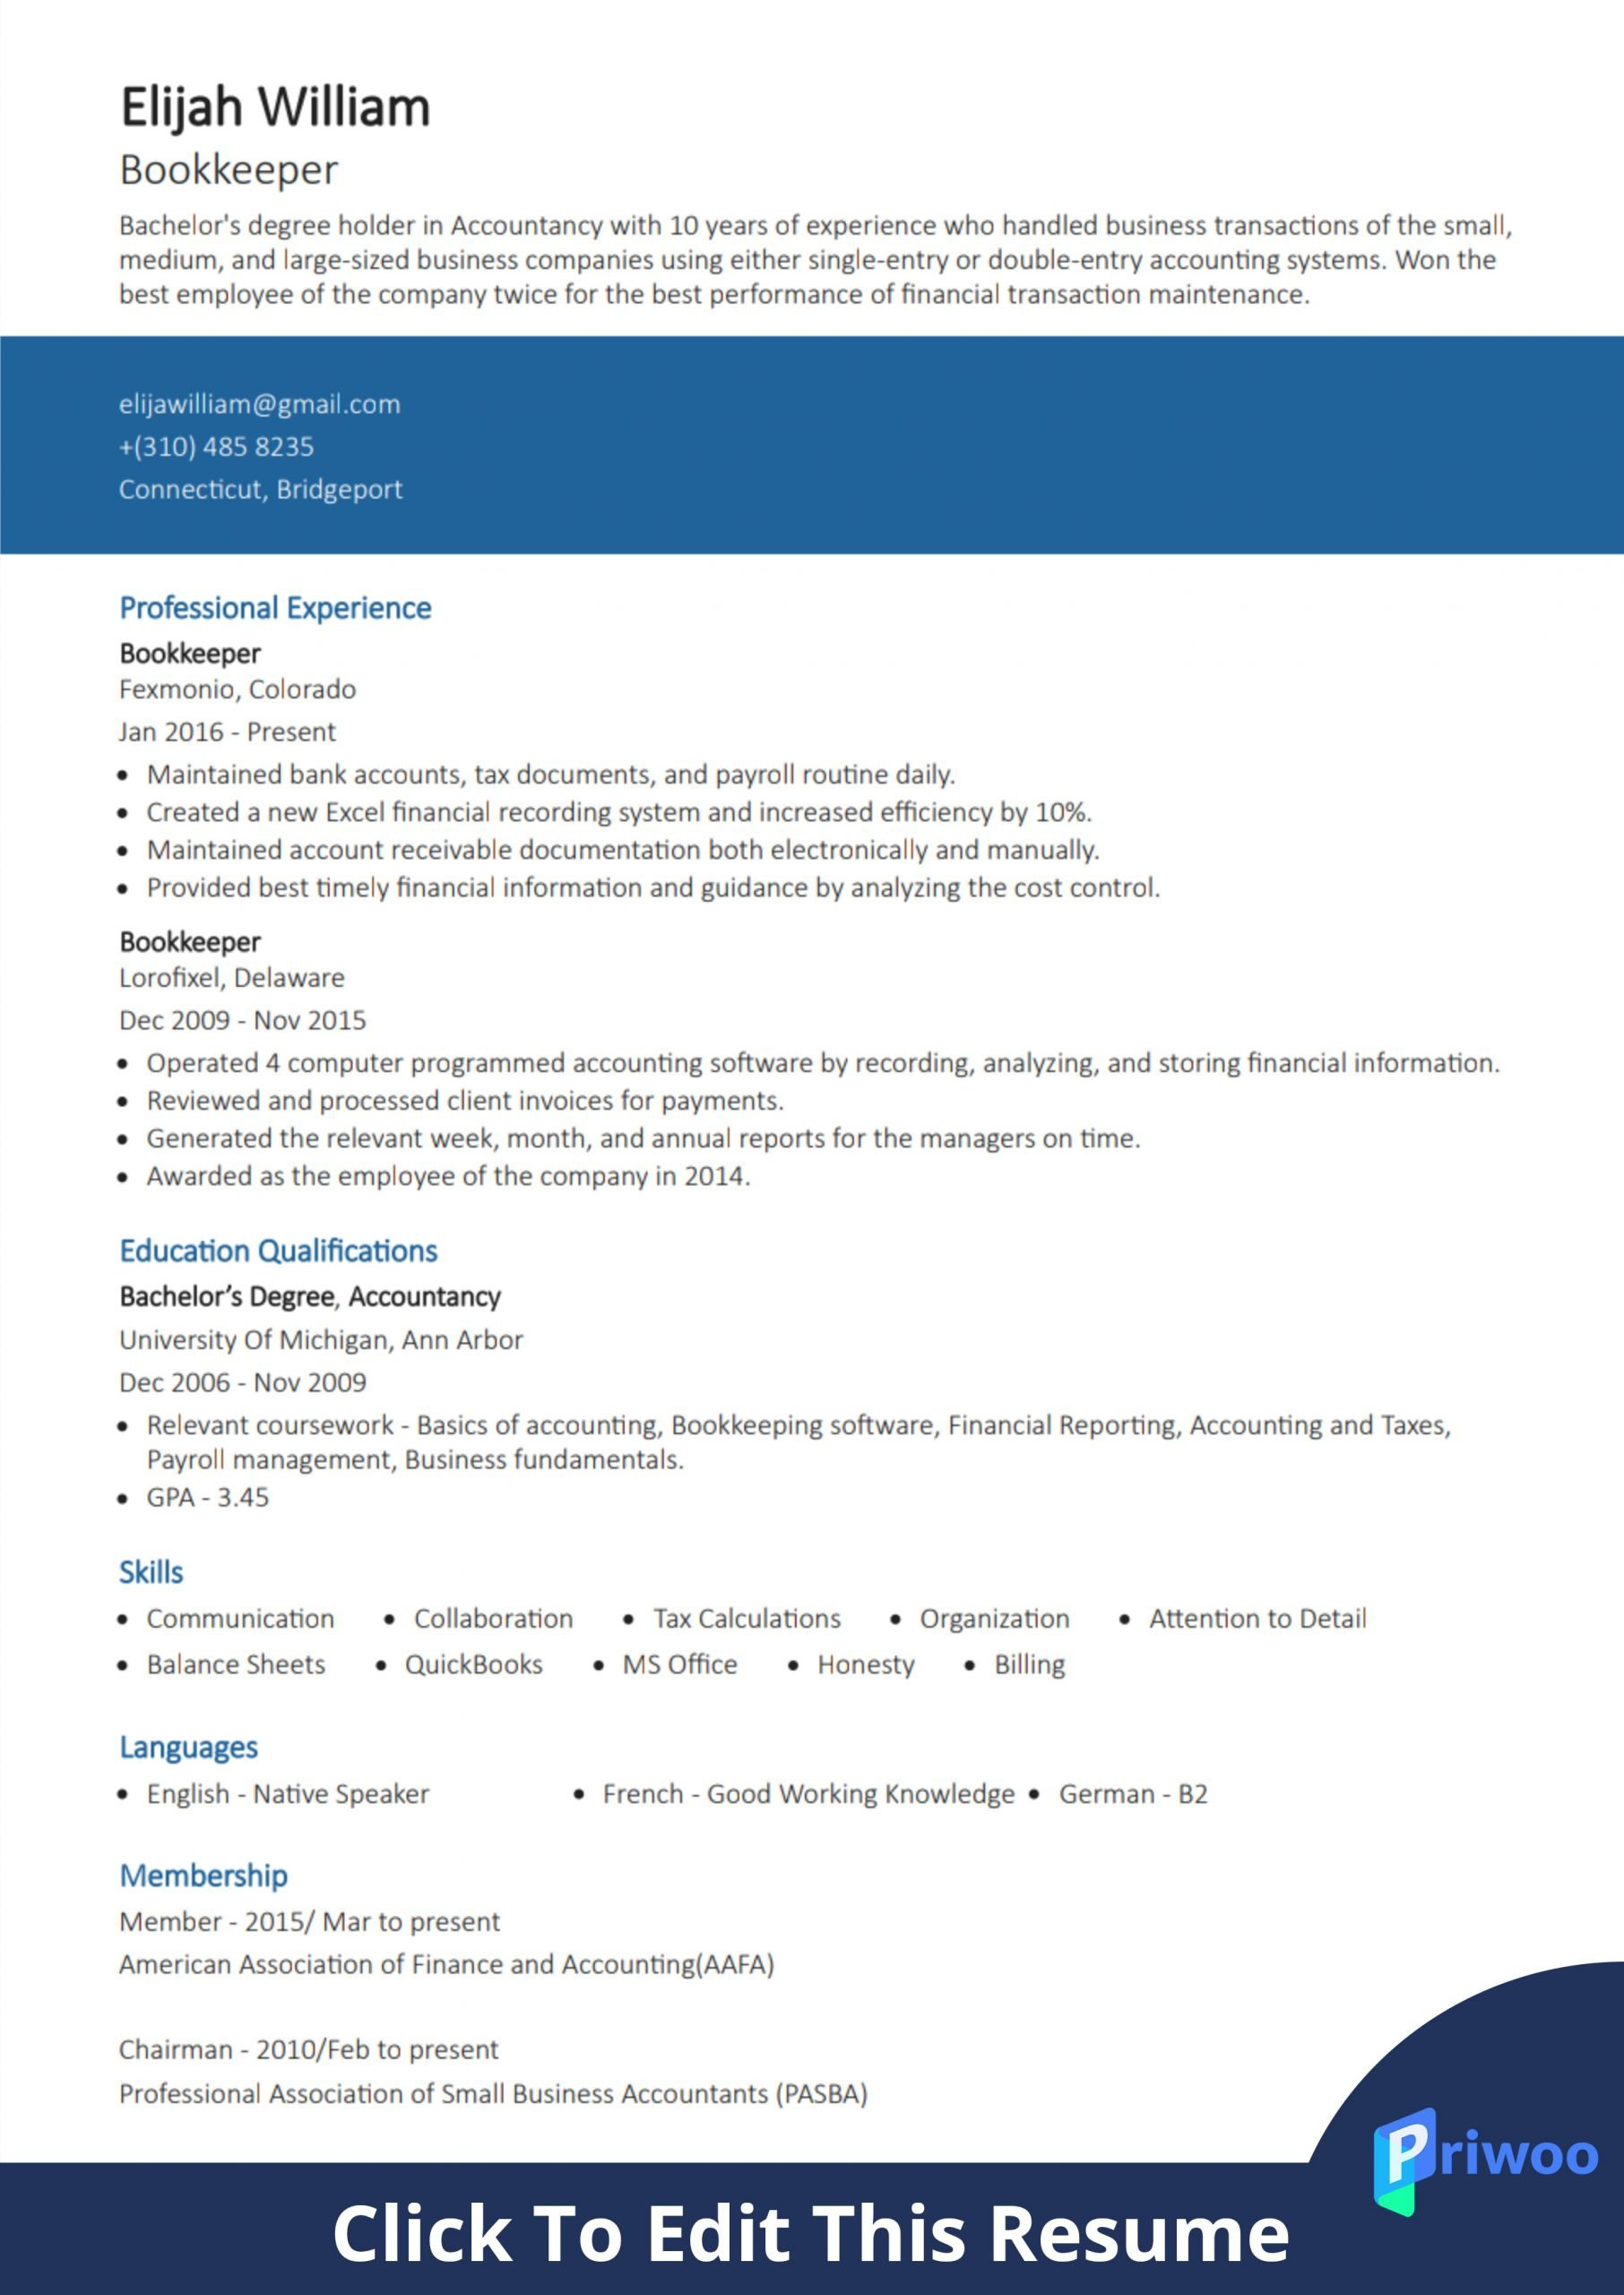 Entry Level Accounting Bookkeeping Resume Sample Bookkeeper Resume Example (best Action Verbs & Skills) Priwoo